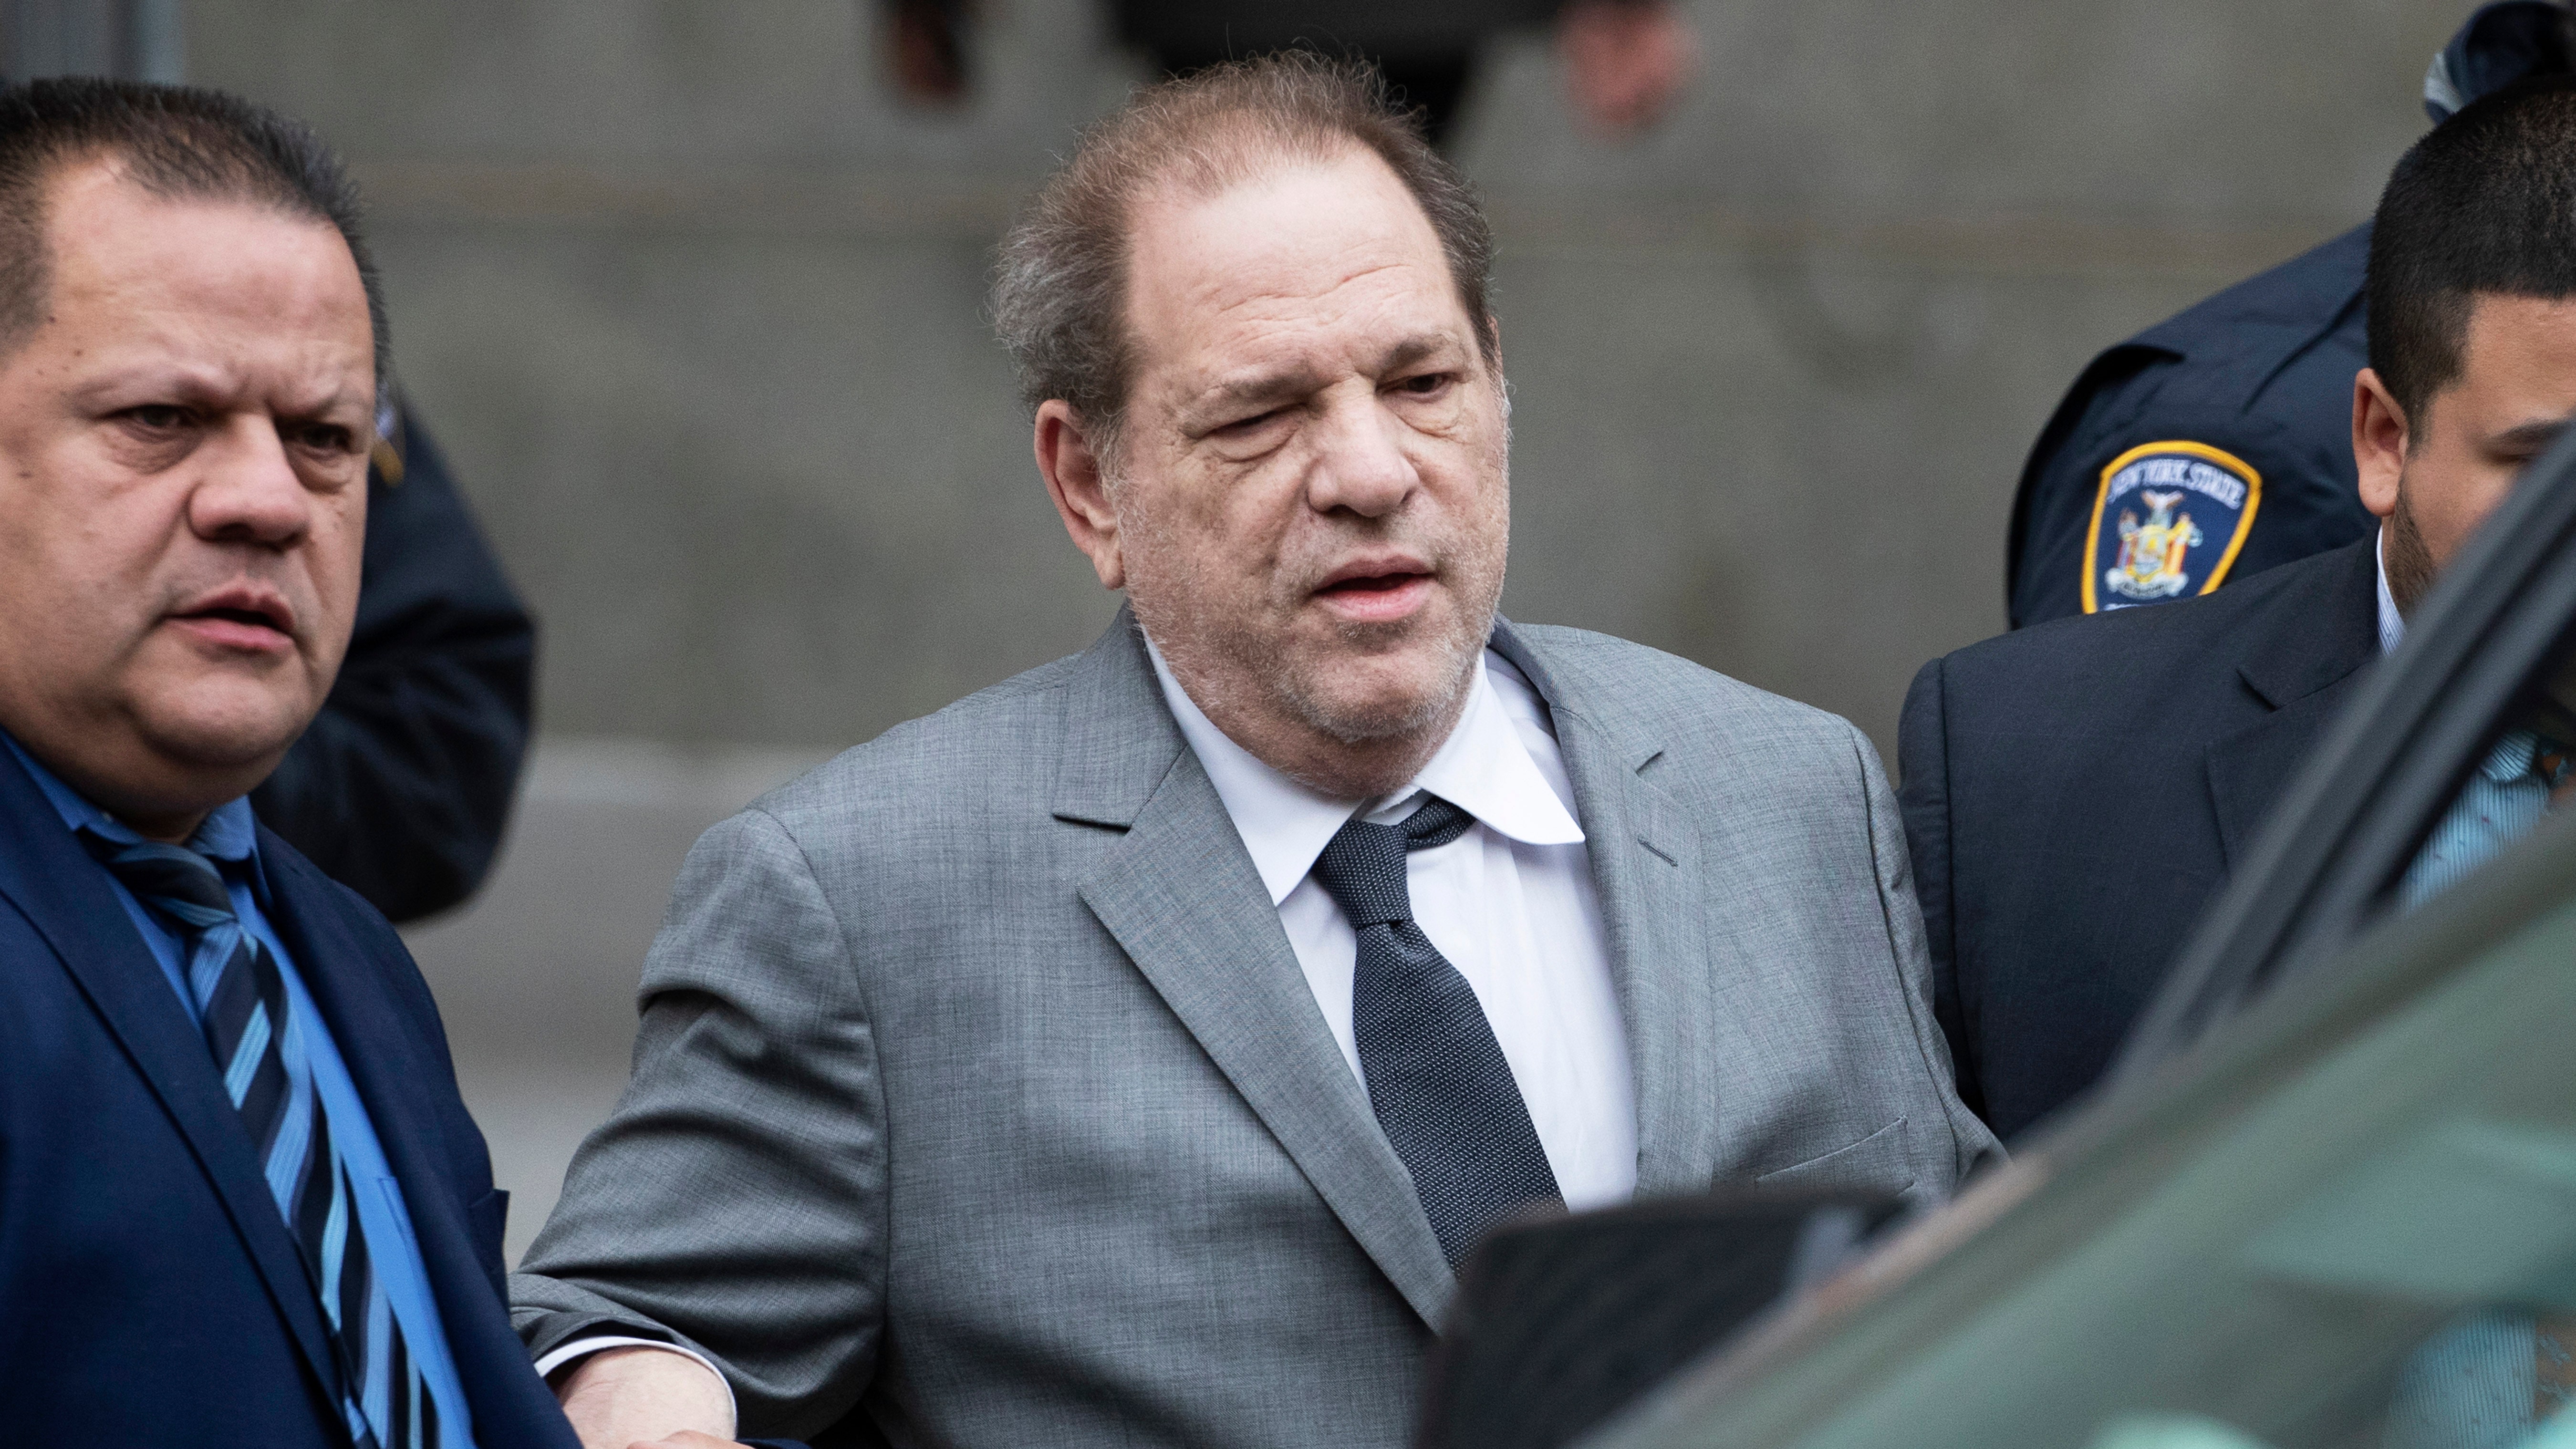 Harvey Weinstein appeals conviction, lawyers claim judge 'neglected' fair trial